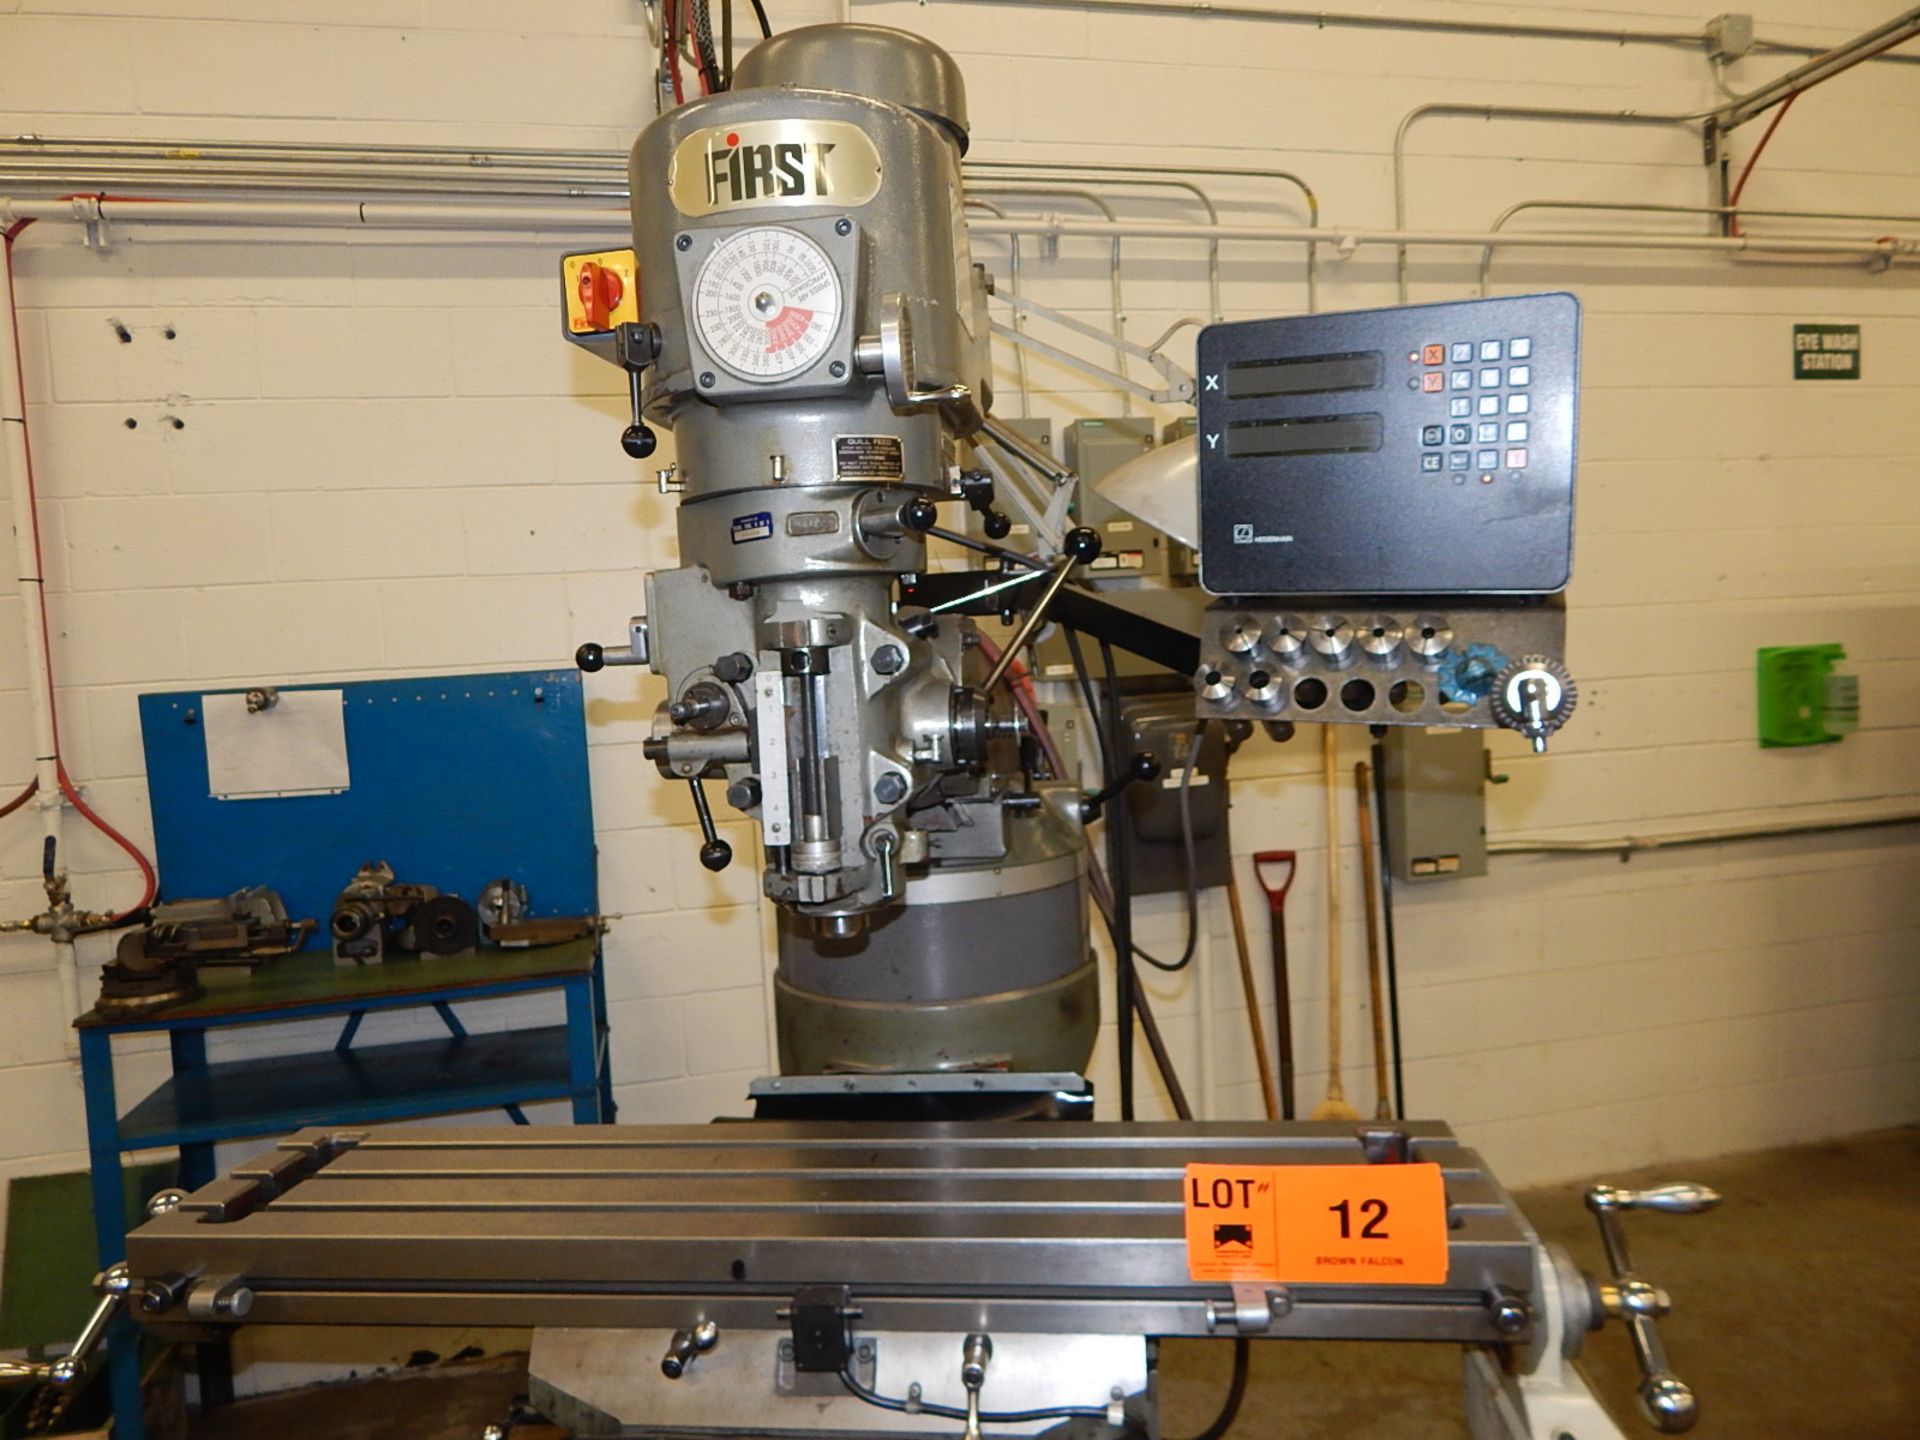 FIRST TURRET MILLING MACHINE WITH SPEEDS TO 4500 RPM, 36" X 9" T-SLOT TABLE WITH POWER FEED CONTROL, - Image 3 of 4